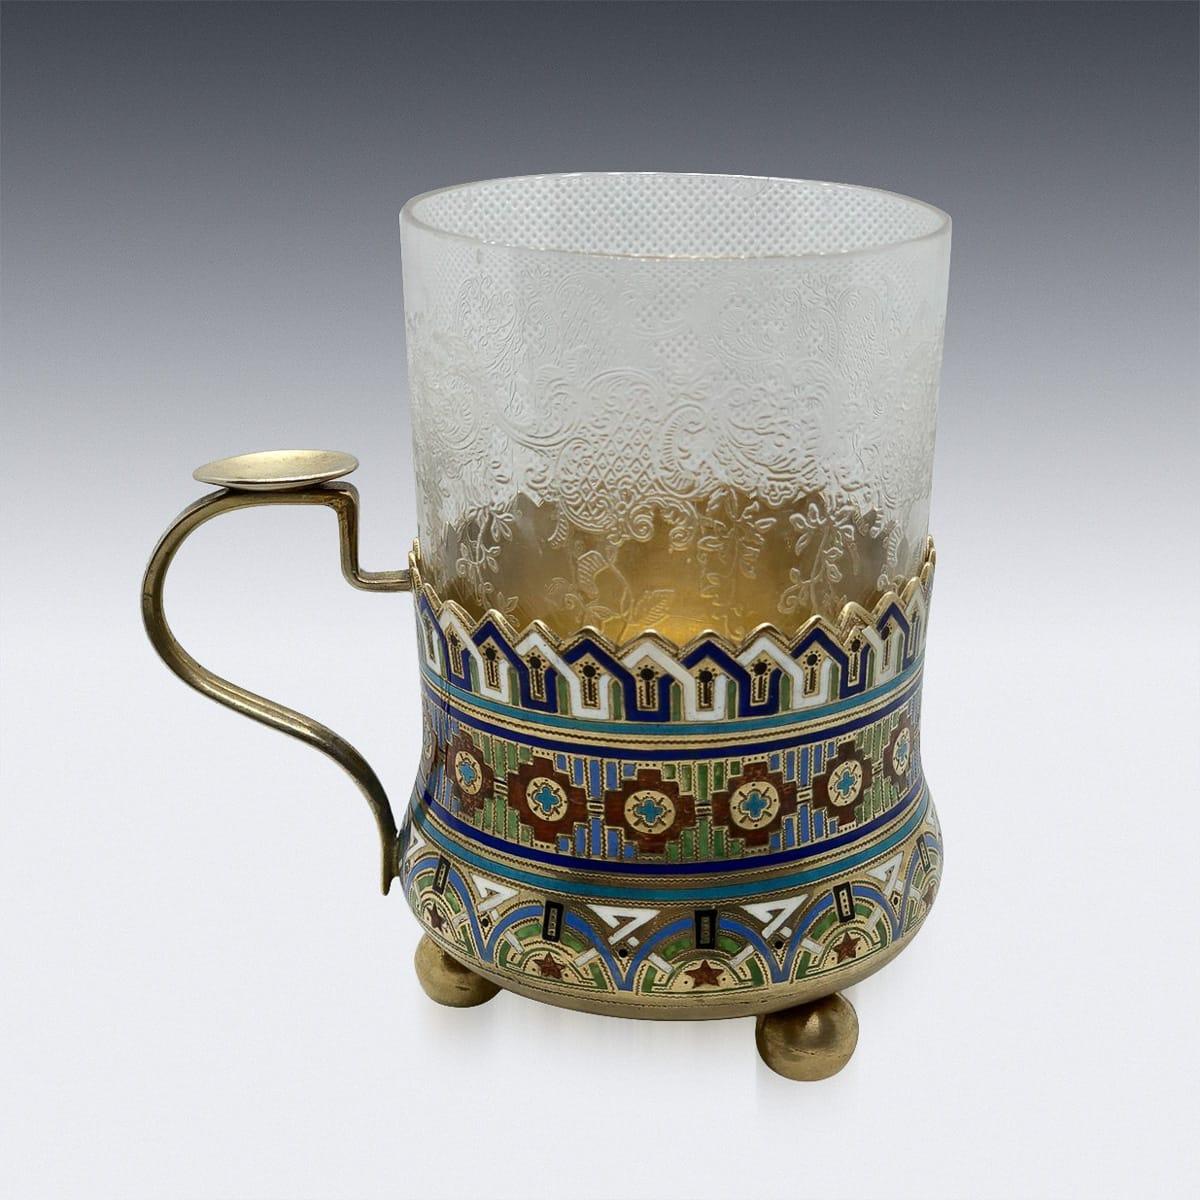 Antique early 20th century Imperial Russian solid silver-gilt and champleve enamel tea glass holder, circular with a plain handle mounted with a thumb-rest, standing on three ball feet, the body profusely decorated with pan-slavic geometric motifs